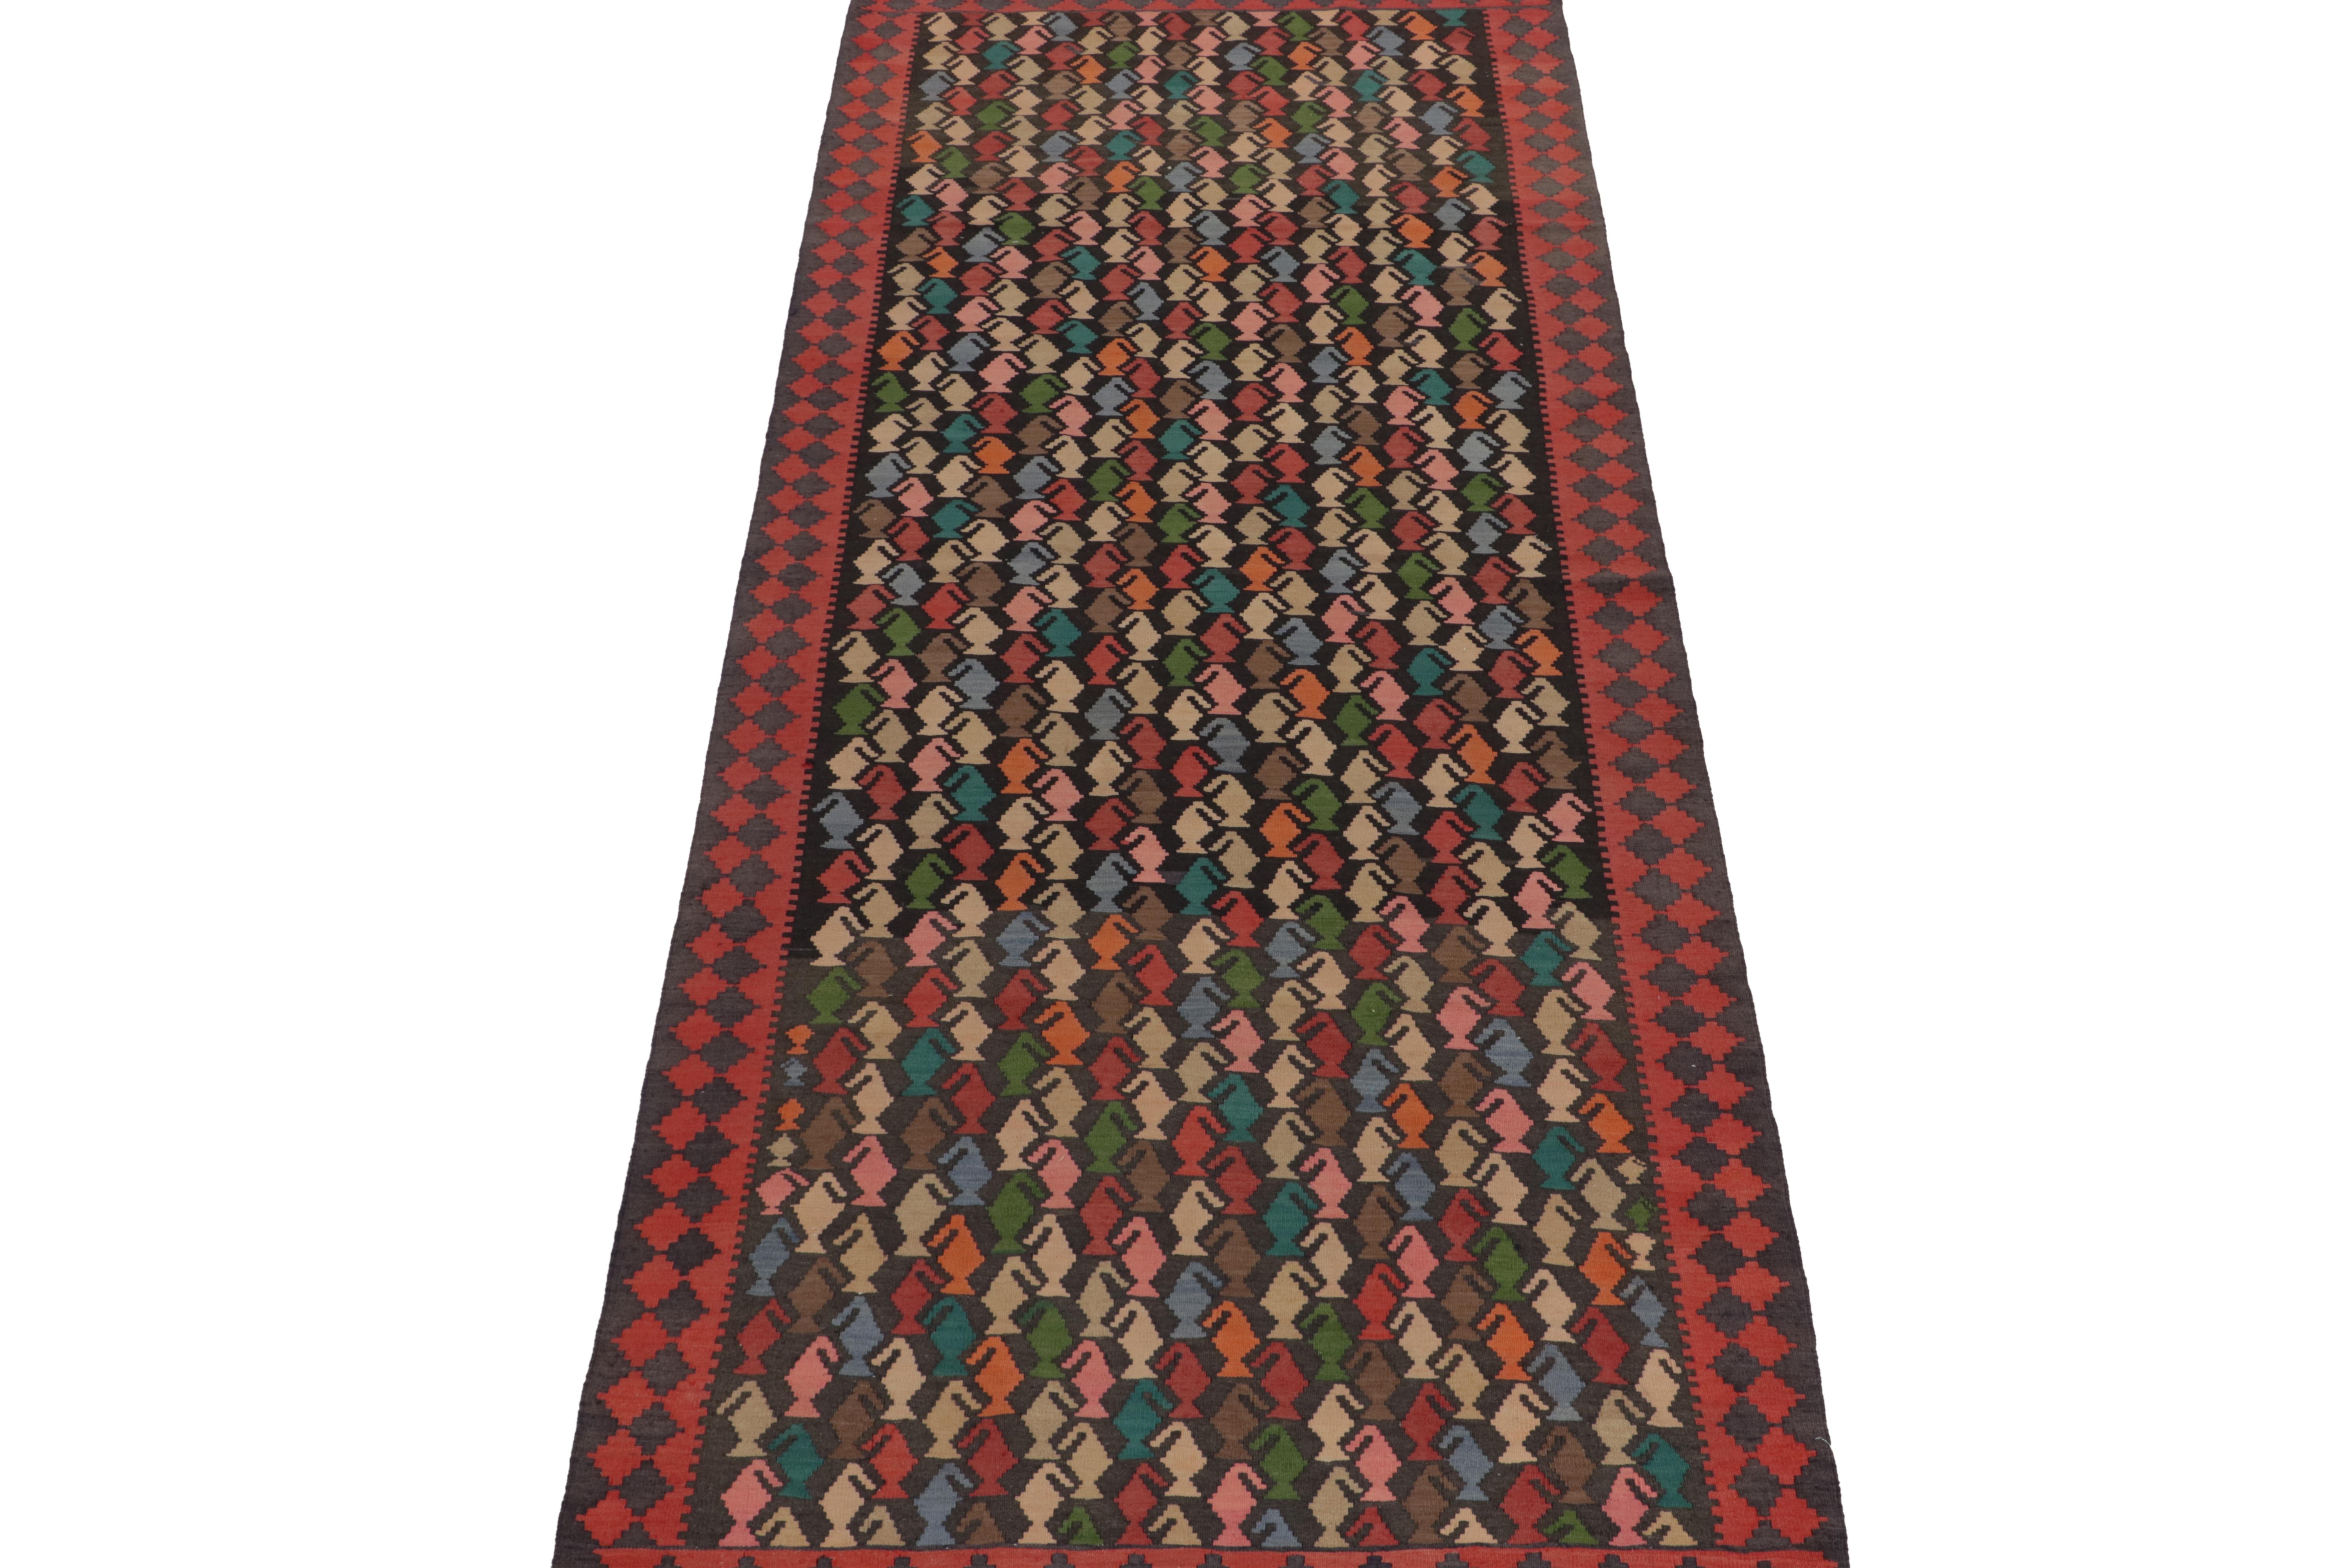 This vintage 5x12 Persian Kilim is a tribal rug from Meshkin—a small northwestern village known for its fabulous long rugs like this gallery rug. Handwoven in wool, it originates circa 1950-1960.

Further on the Design:

This unique design prefers